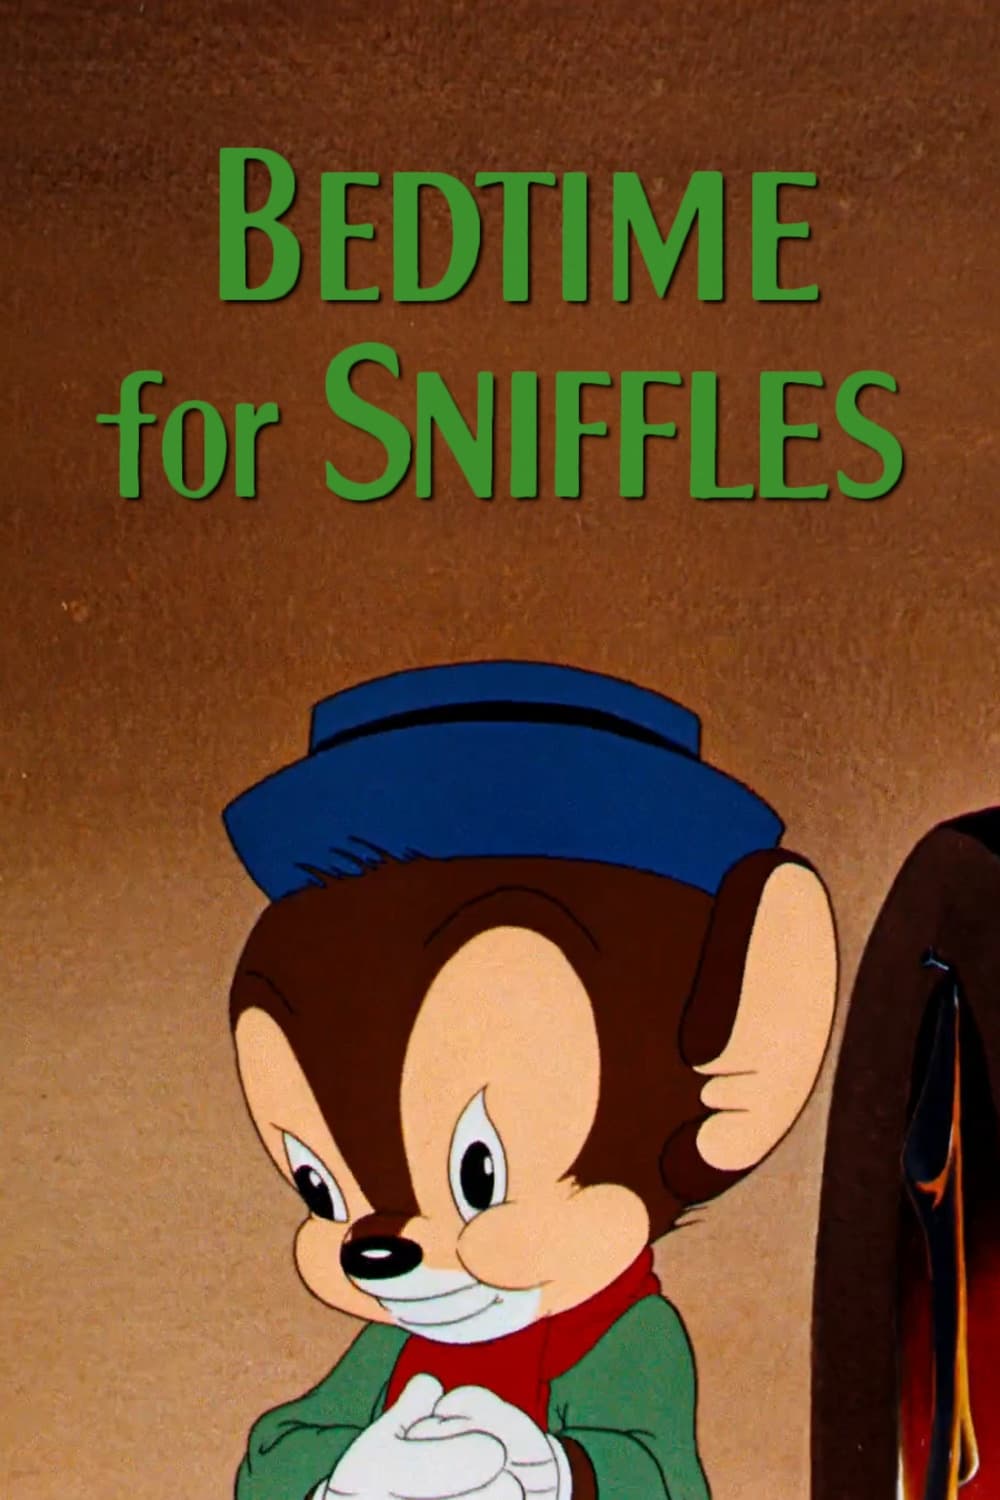 Bedtime for Sniffles (1940)